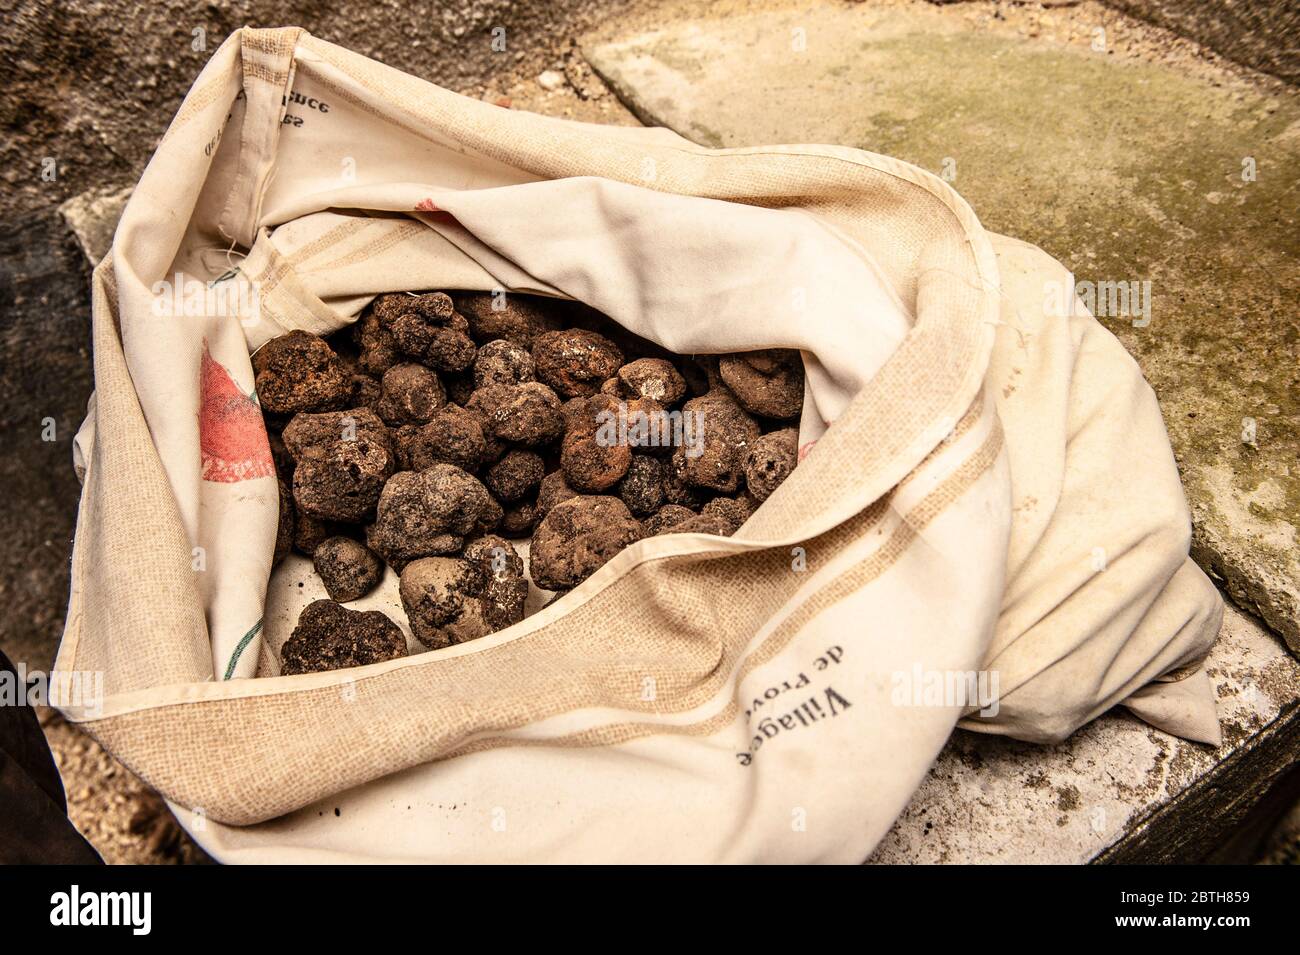 Black Tricastin truffles for sale at the truffle market of Saint-Paul-3-Châteaux in southern France Stock Photo